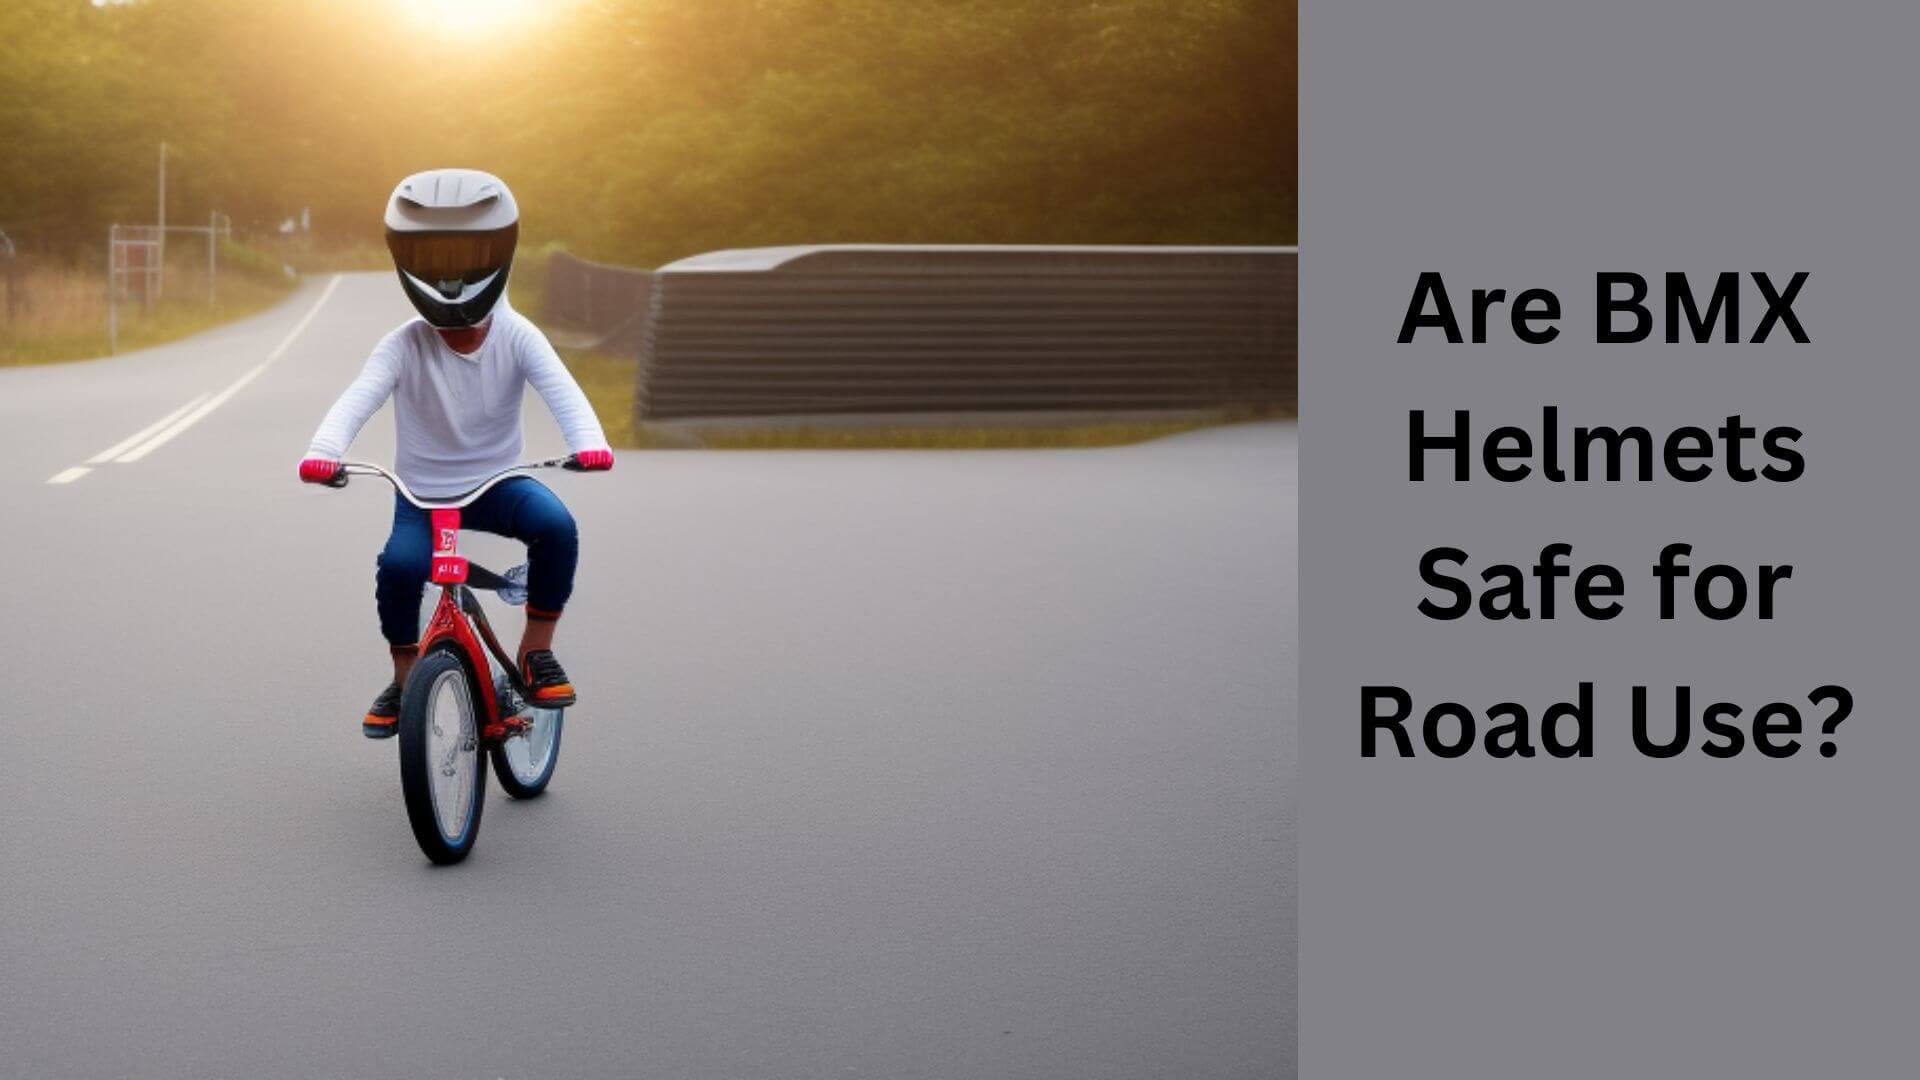 Are BMX Helmets Safe for Road Use?